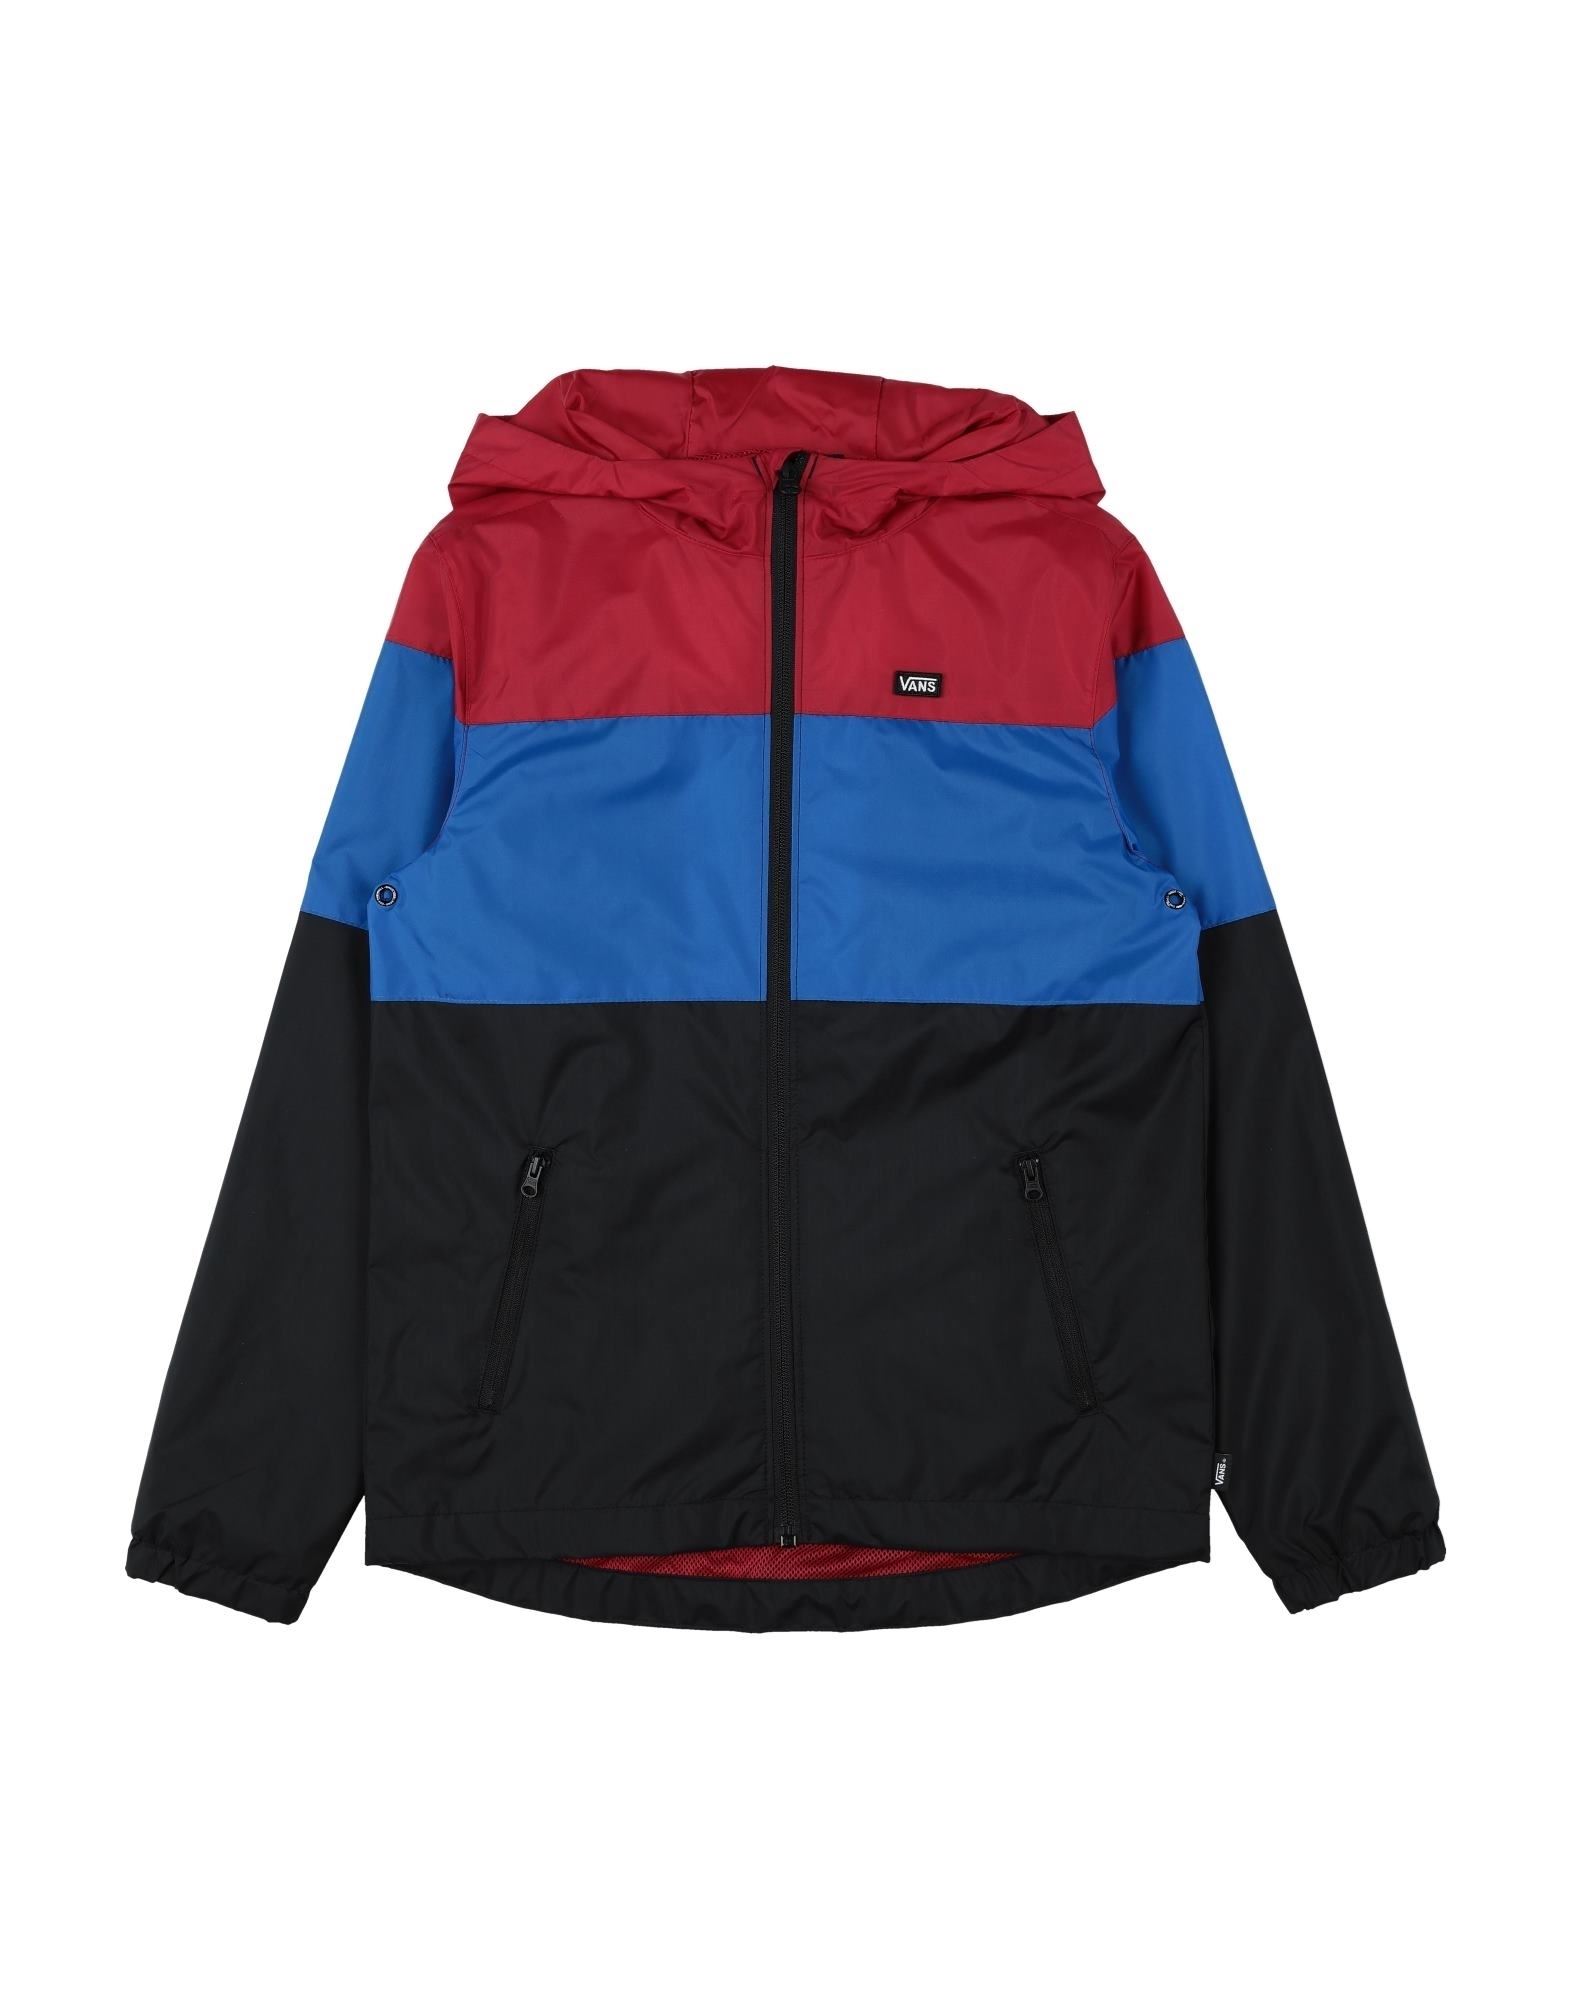 ＜YOOX＞ ★27%OFF！VANS ボーイズ 9-16 歳 ブルゾン レッド 10 ナイロン 100% BY BARRED WINDBREAKER BOYS